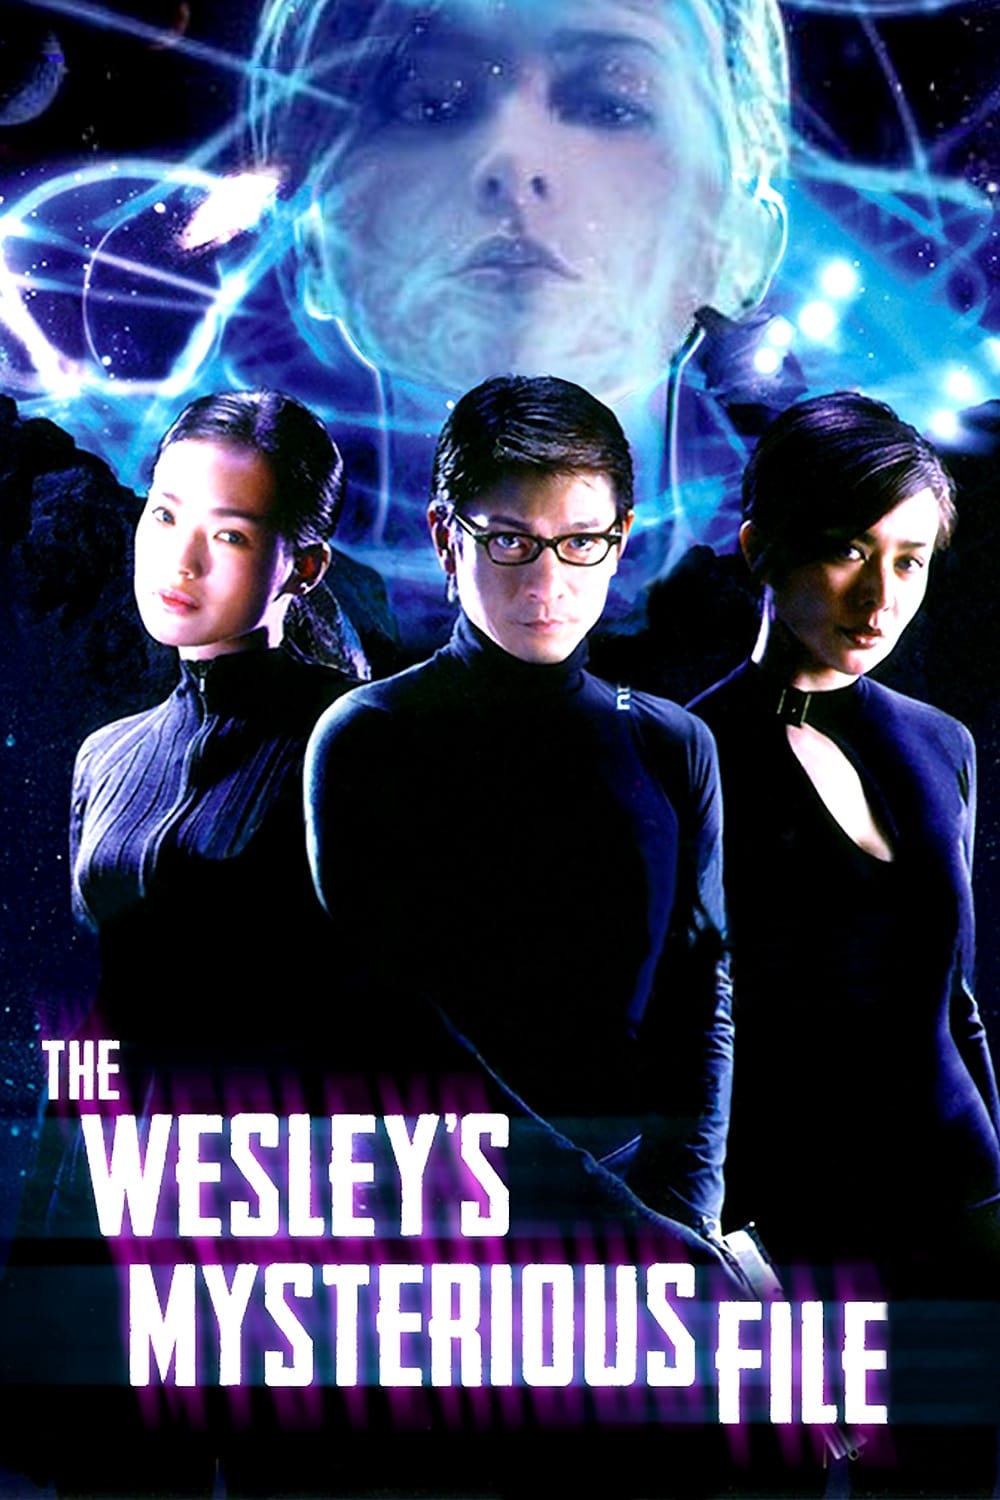 The Wesley's Mysterious File (2002)